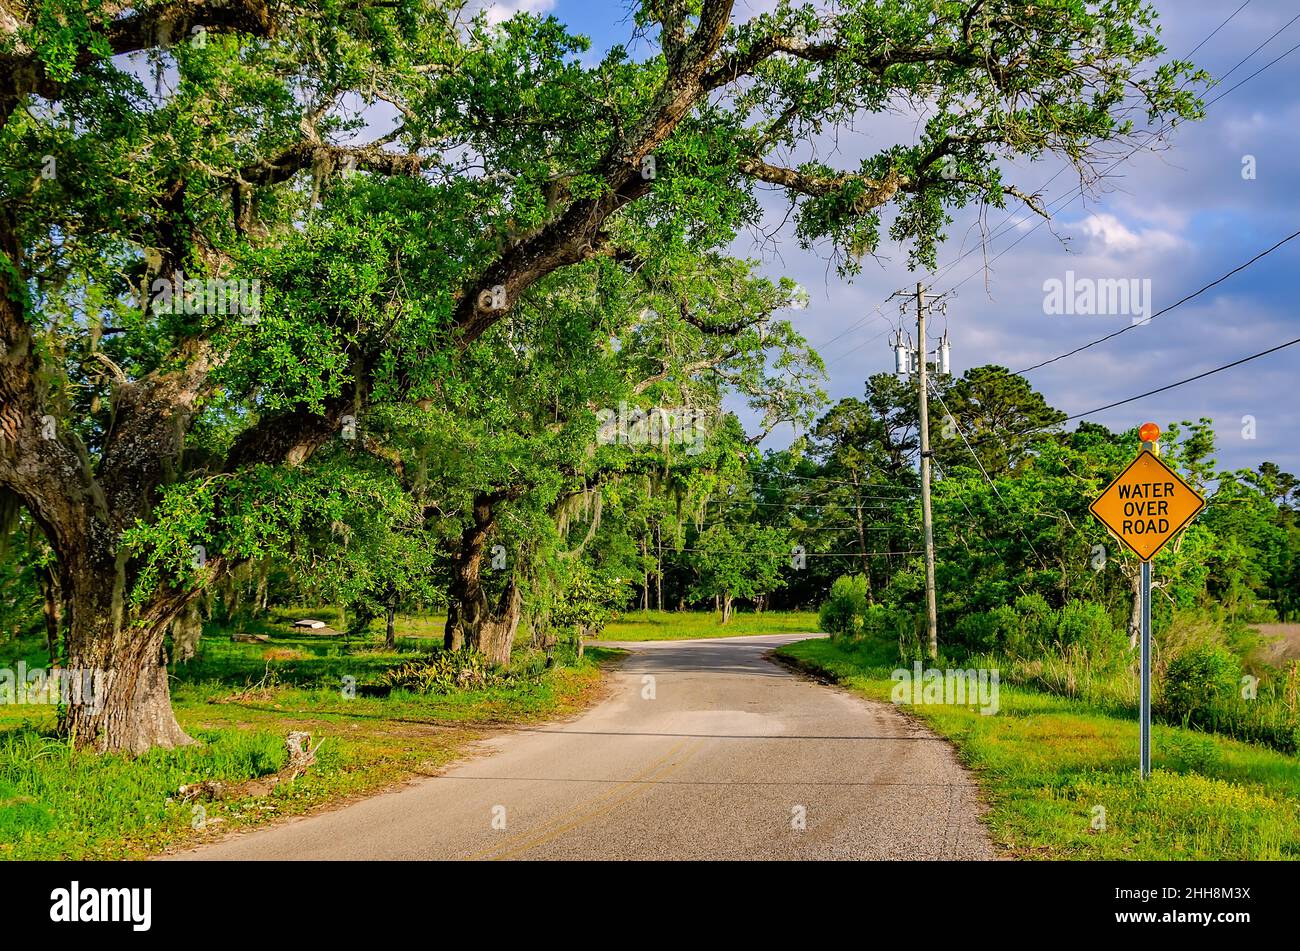 A water over road sign is pictured on Coden Belt Road, April 27, 2021, in Bayou La Batre, Alabama. Stock Photo